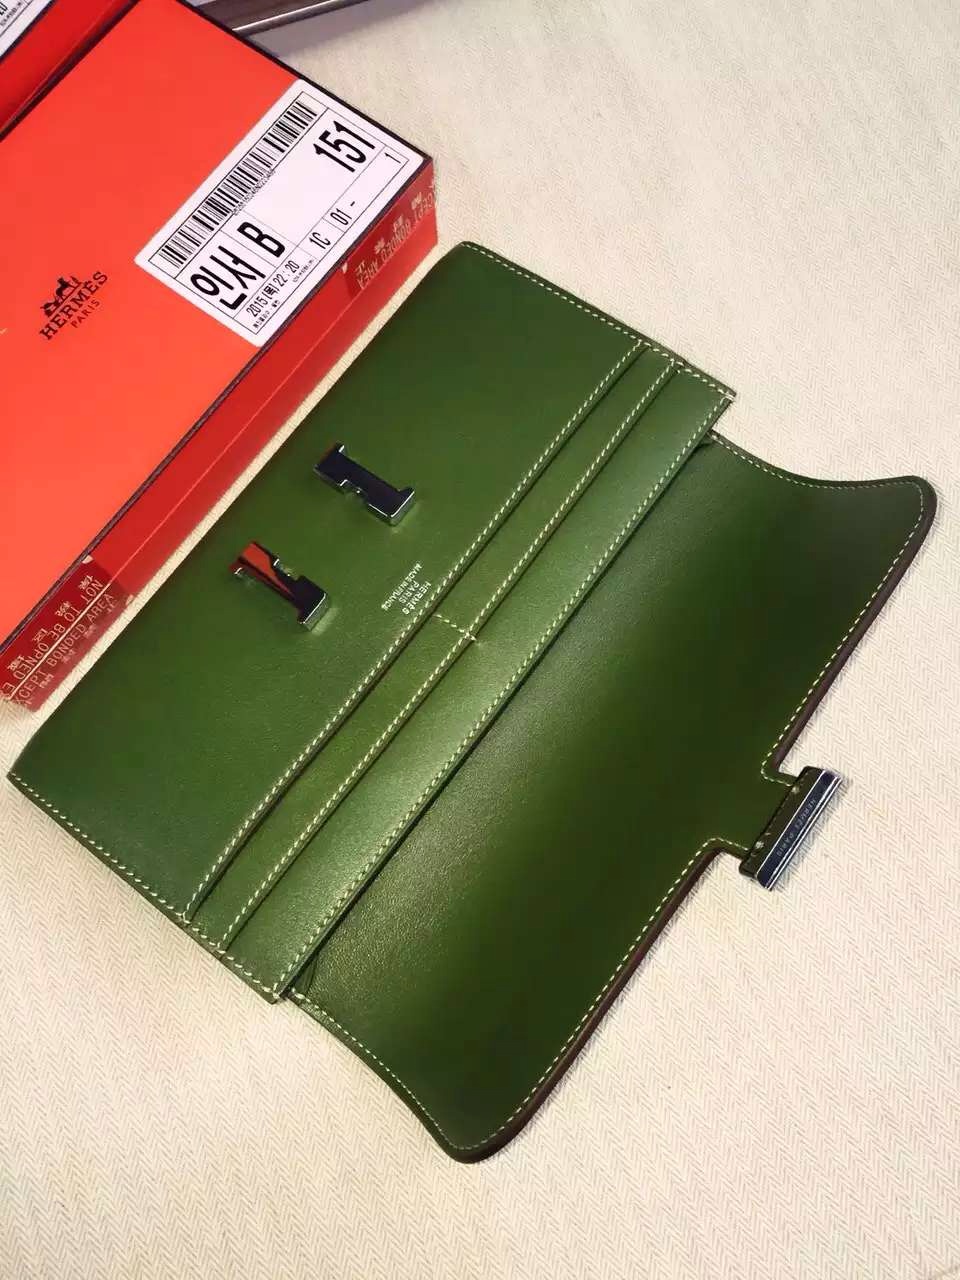 Cheap Hermes Swift Leather Constance Long Wallet Clutch Bag in V6 Olive Green 21CM